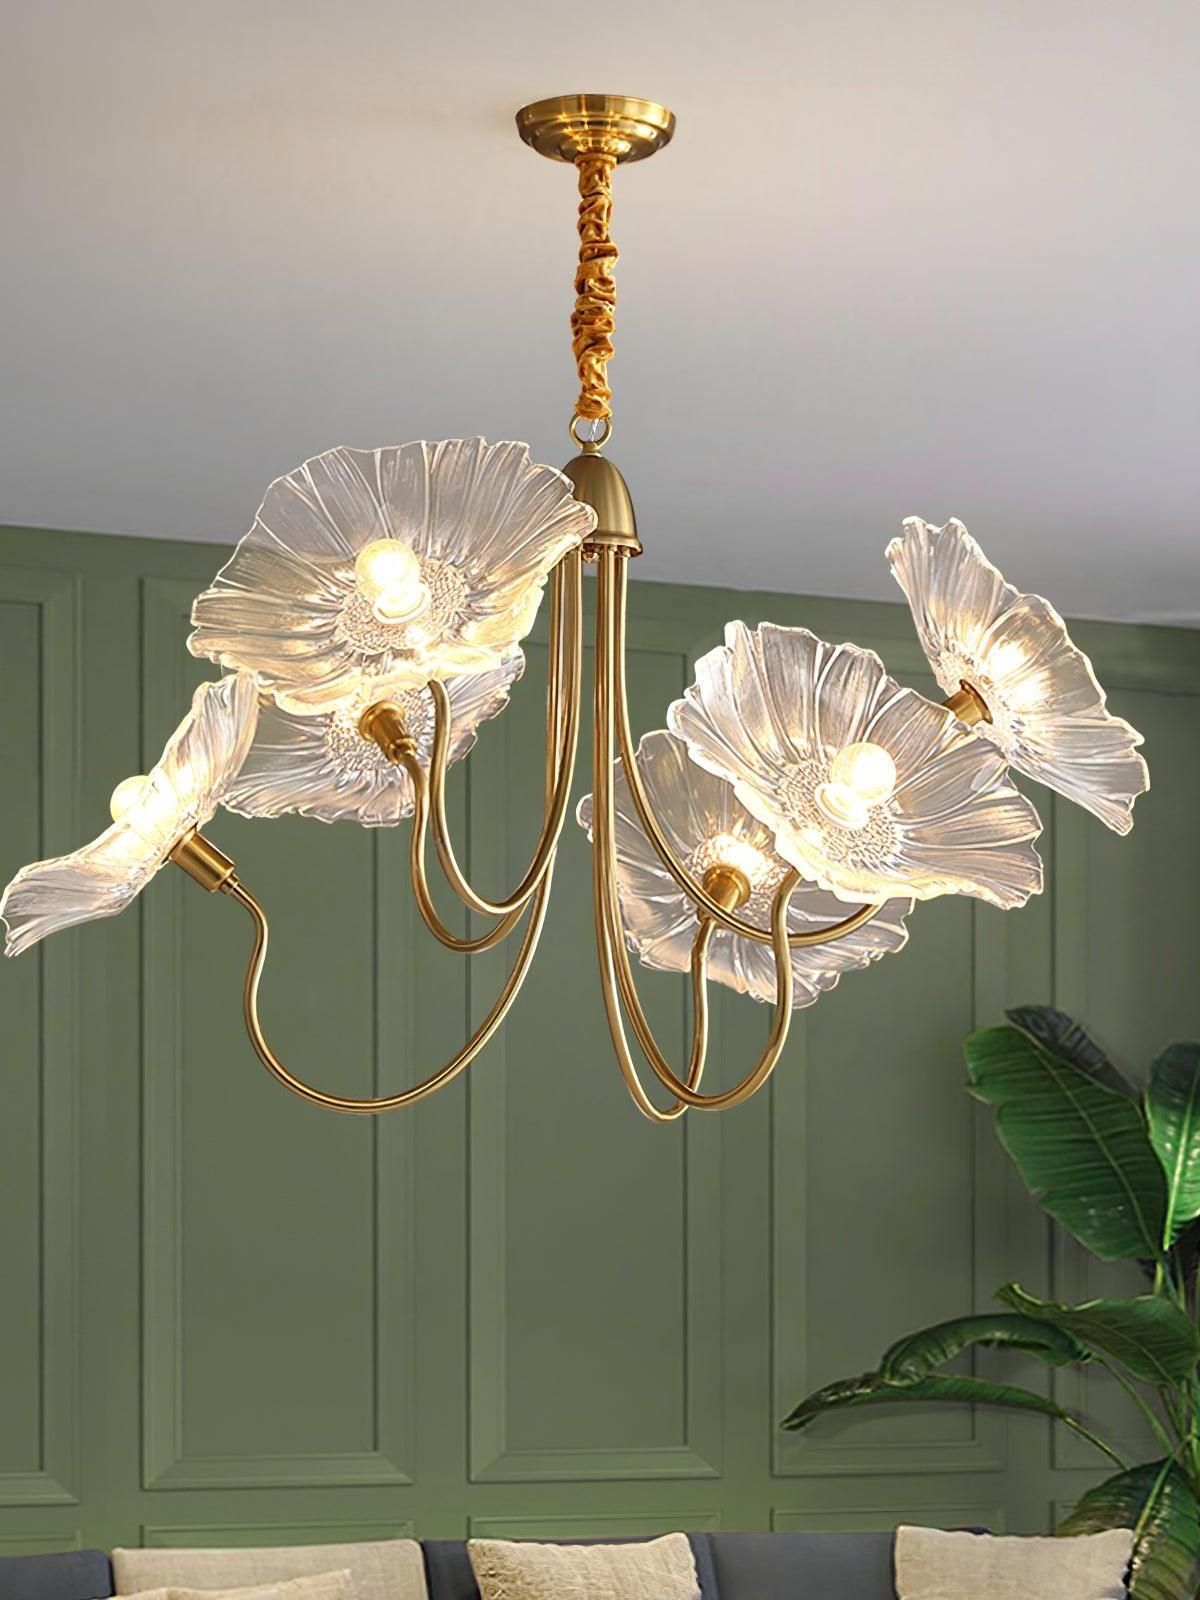 Chandeliers In The Interior Elegant Lighting Fixtures to Transform Your Home Decor